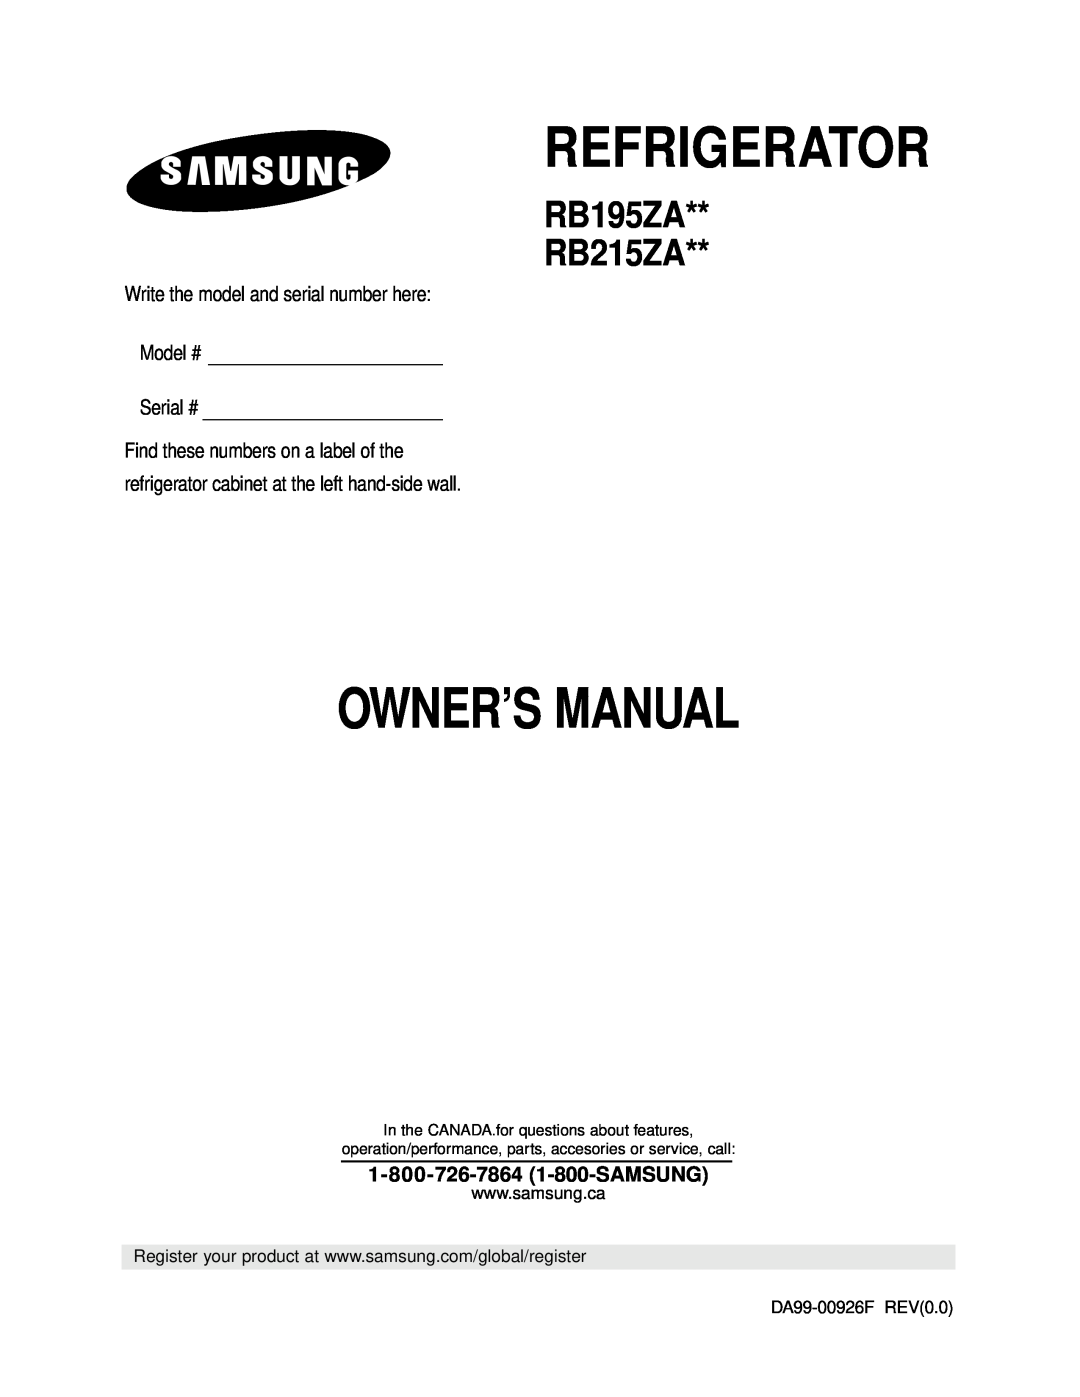 Samsung RB195ZA** owner manual Write the model and serial number here Model # Serial #, Refrigerator, RB195ZA RB215ZA 